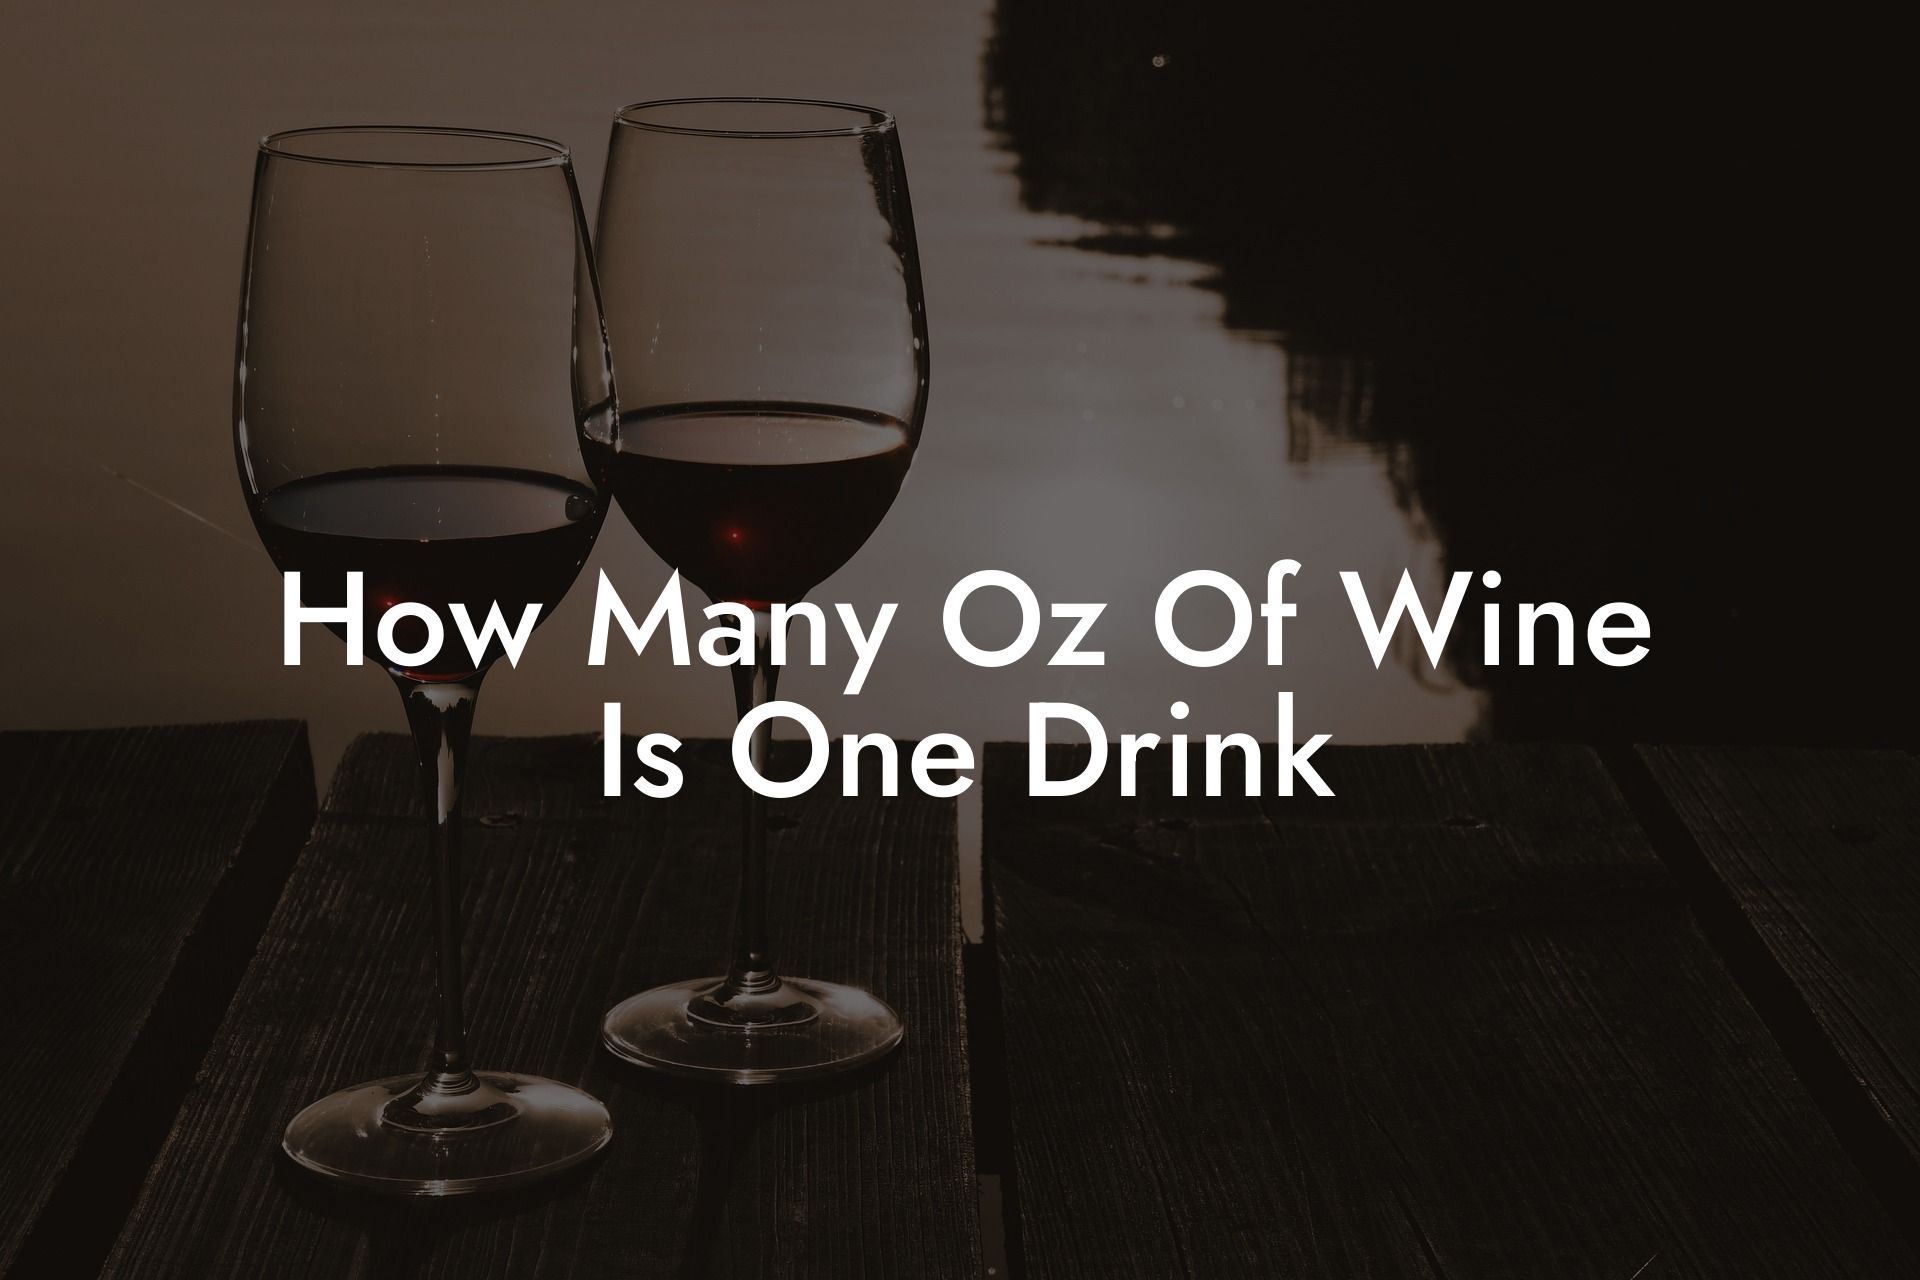 How Many Oz Of Wine Is One Drink